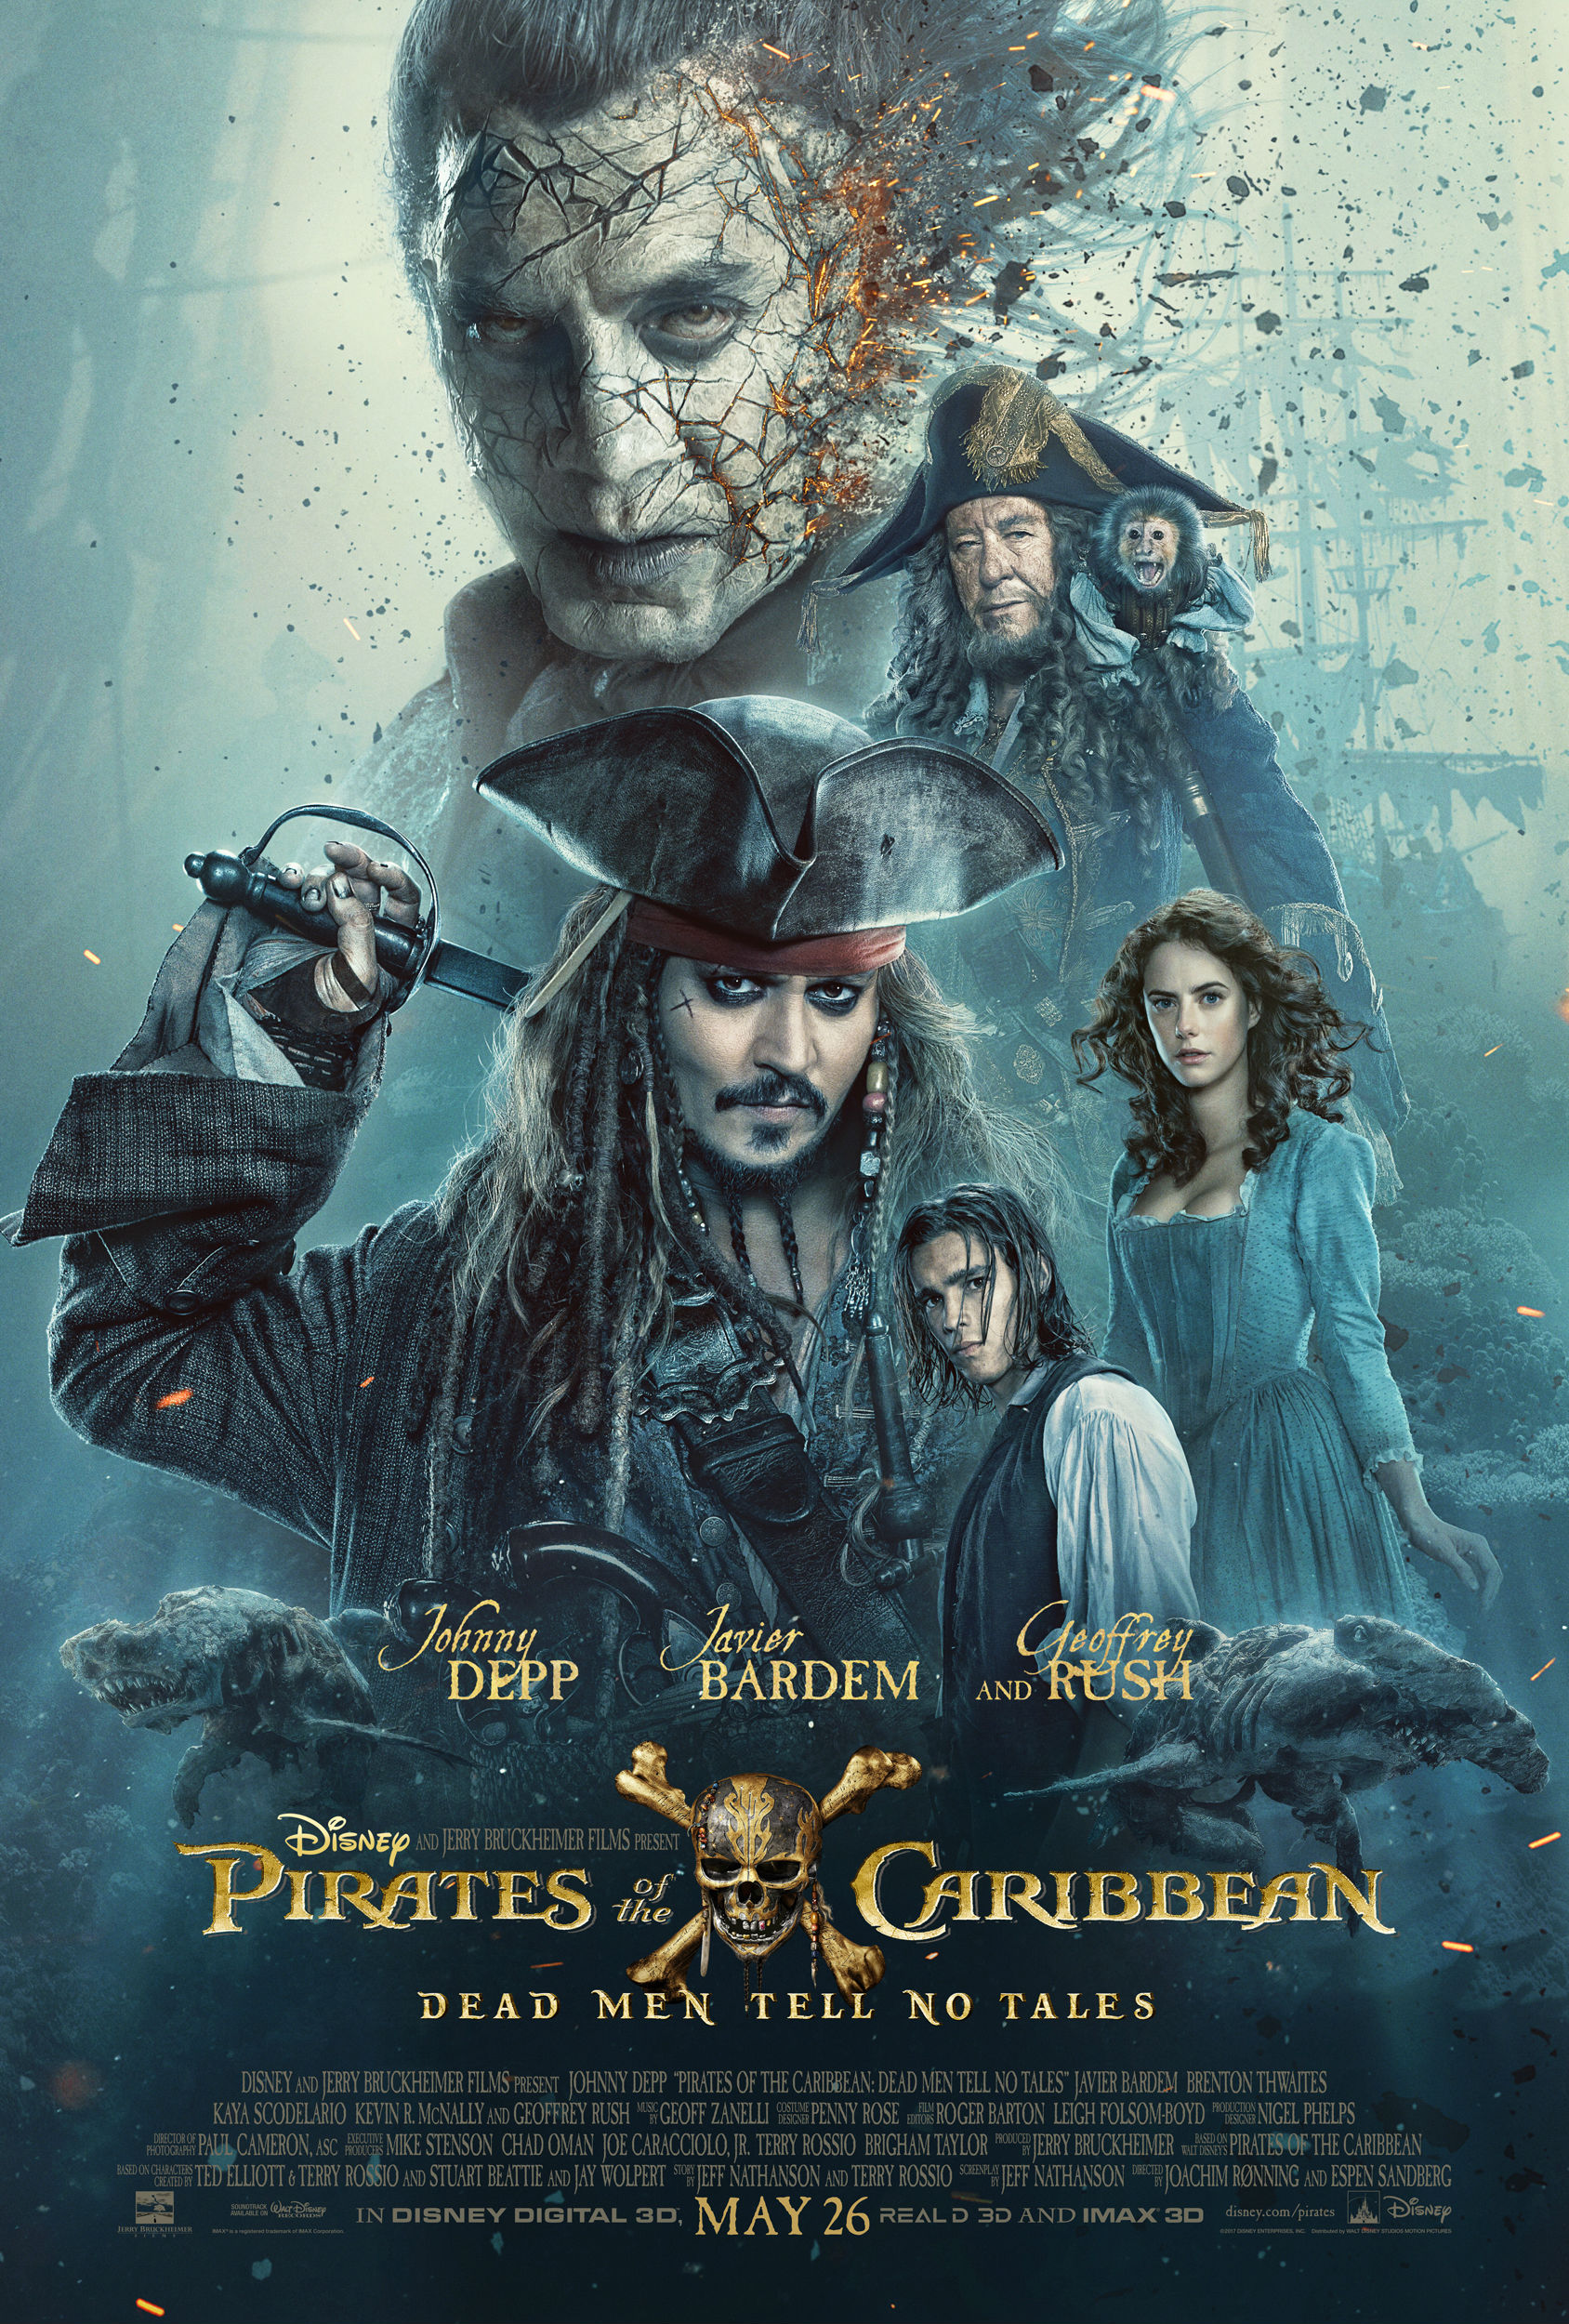 Pirates of the Caribbean: dead men tell no tales (2017) 4K quality